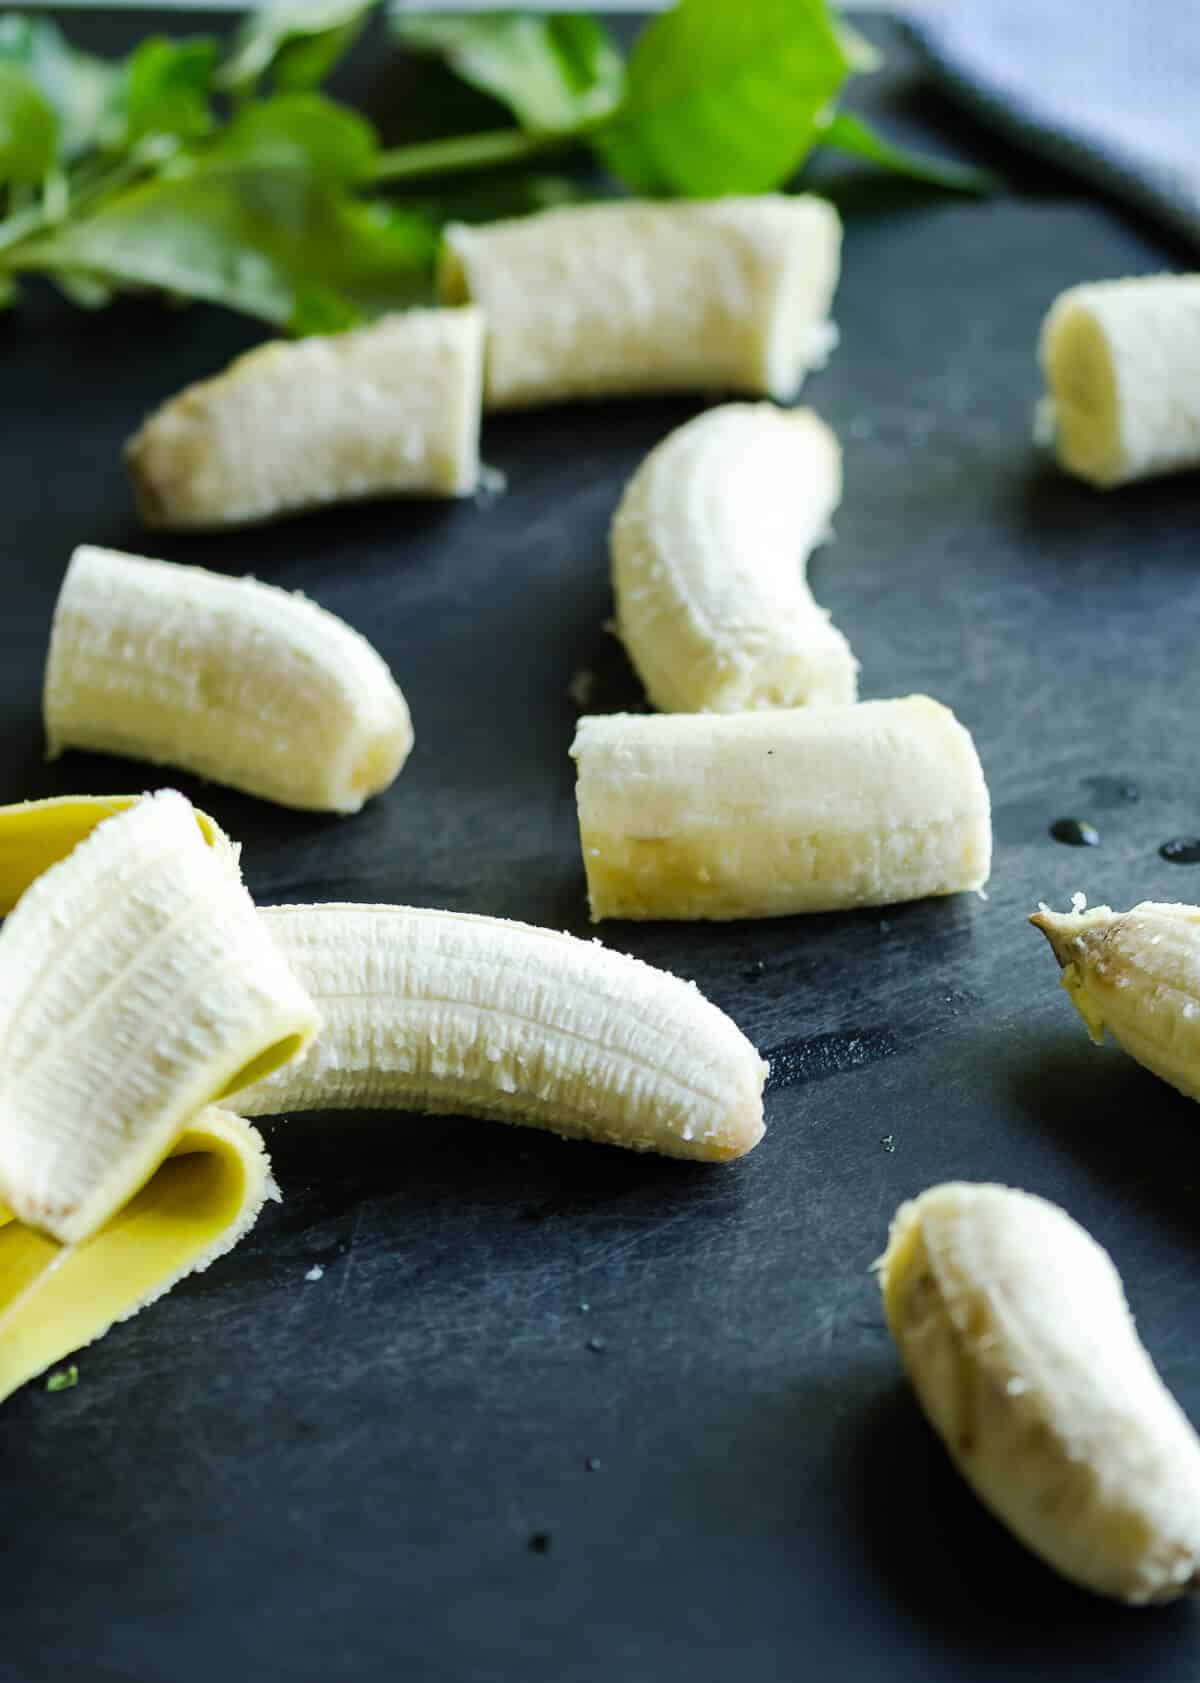 peeled bananas on a cutting board being sliced into thirds